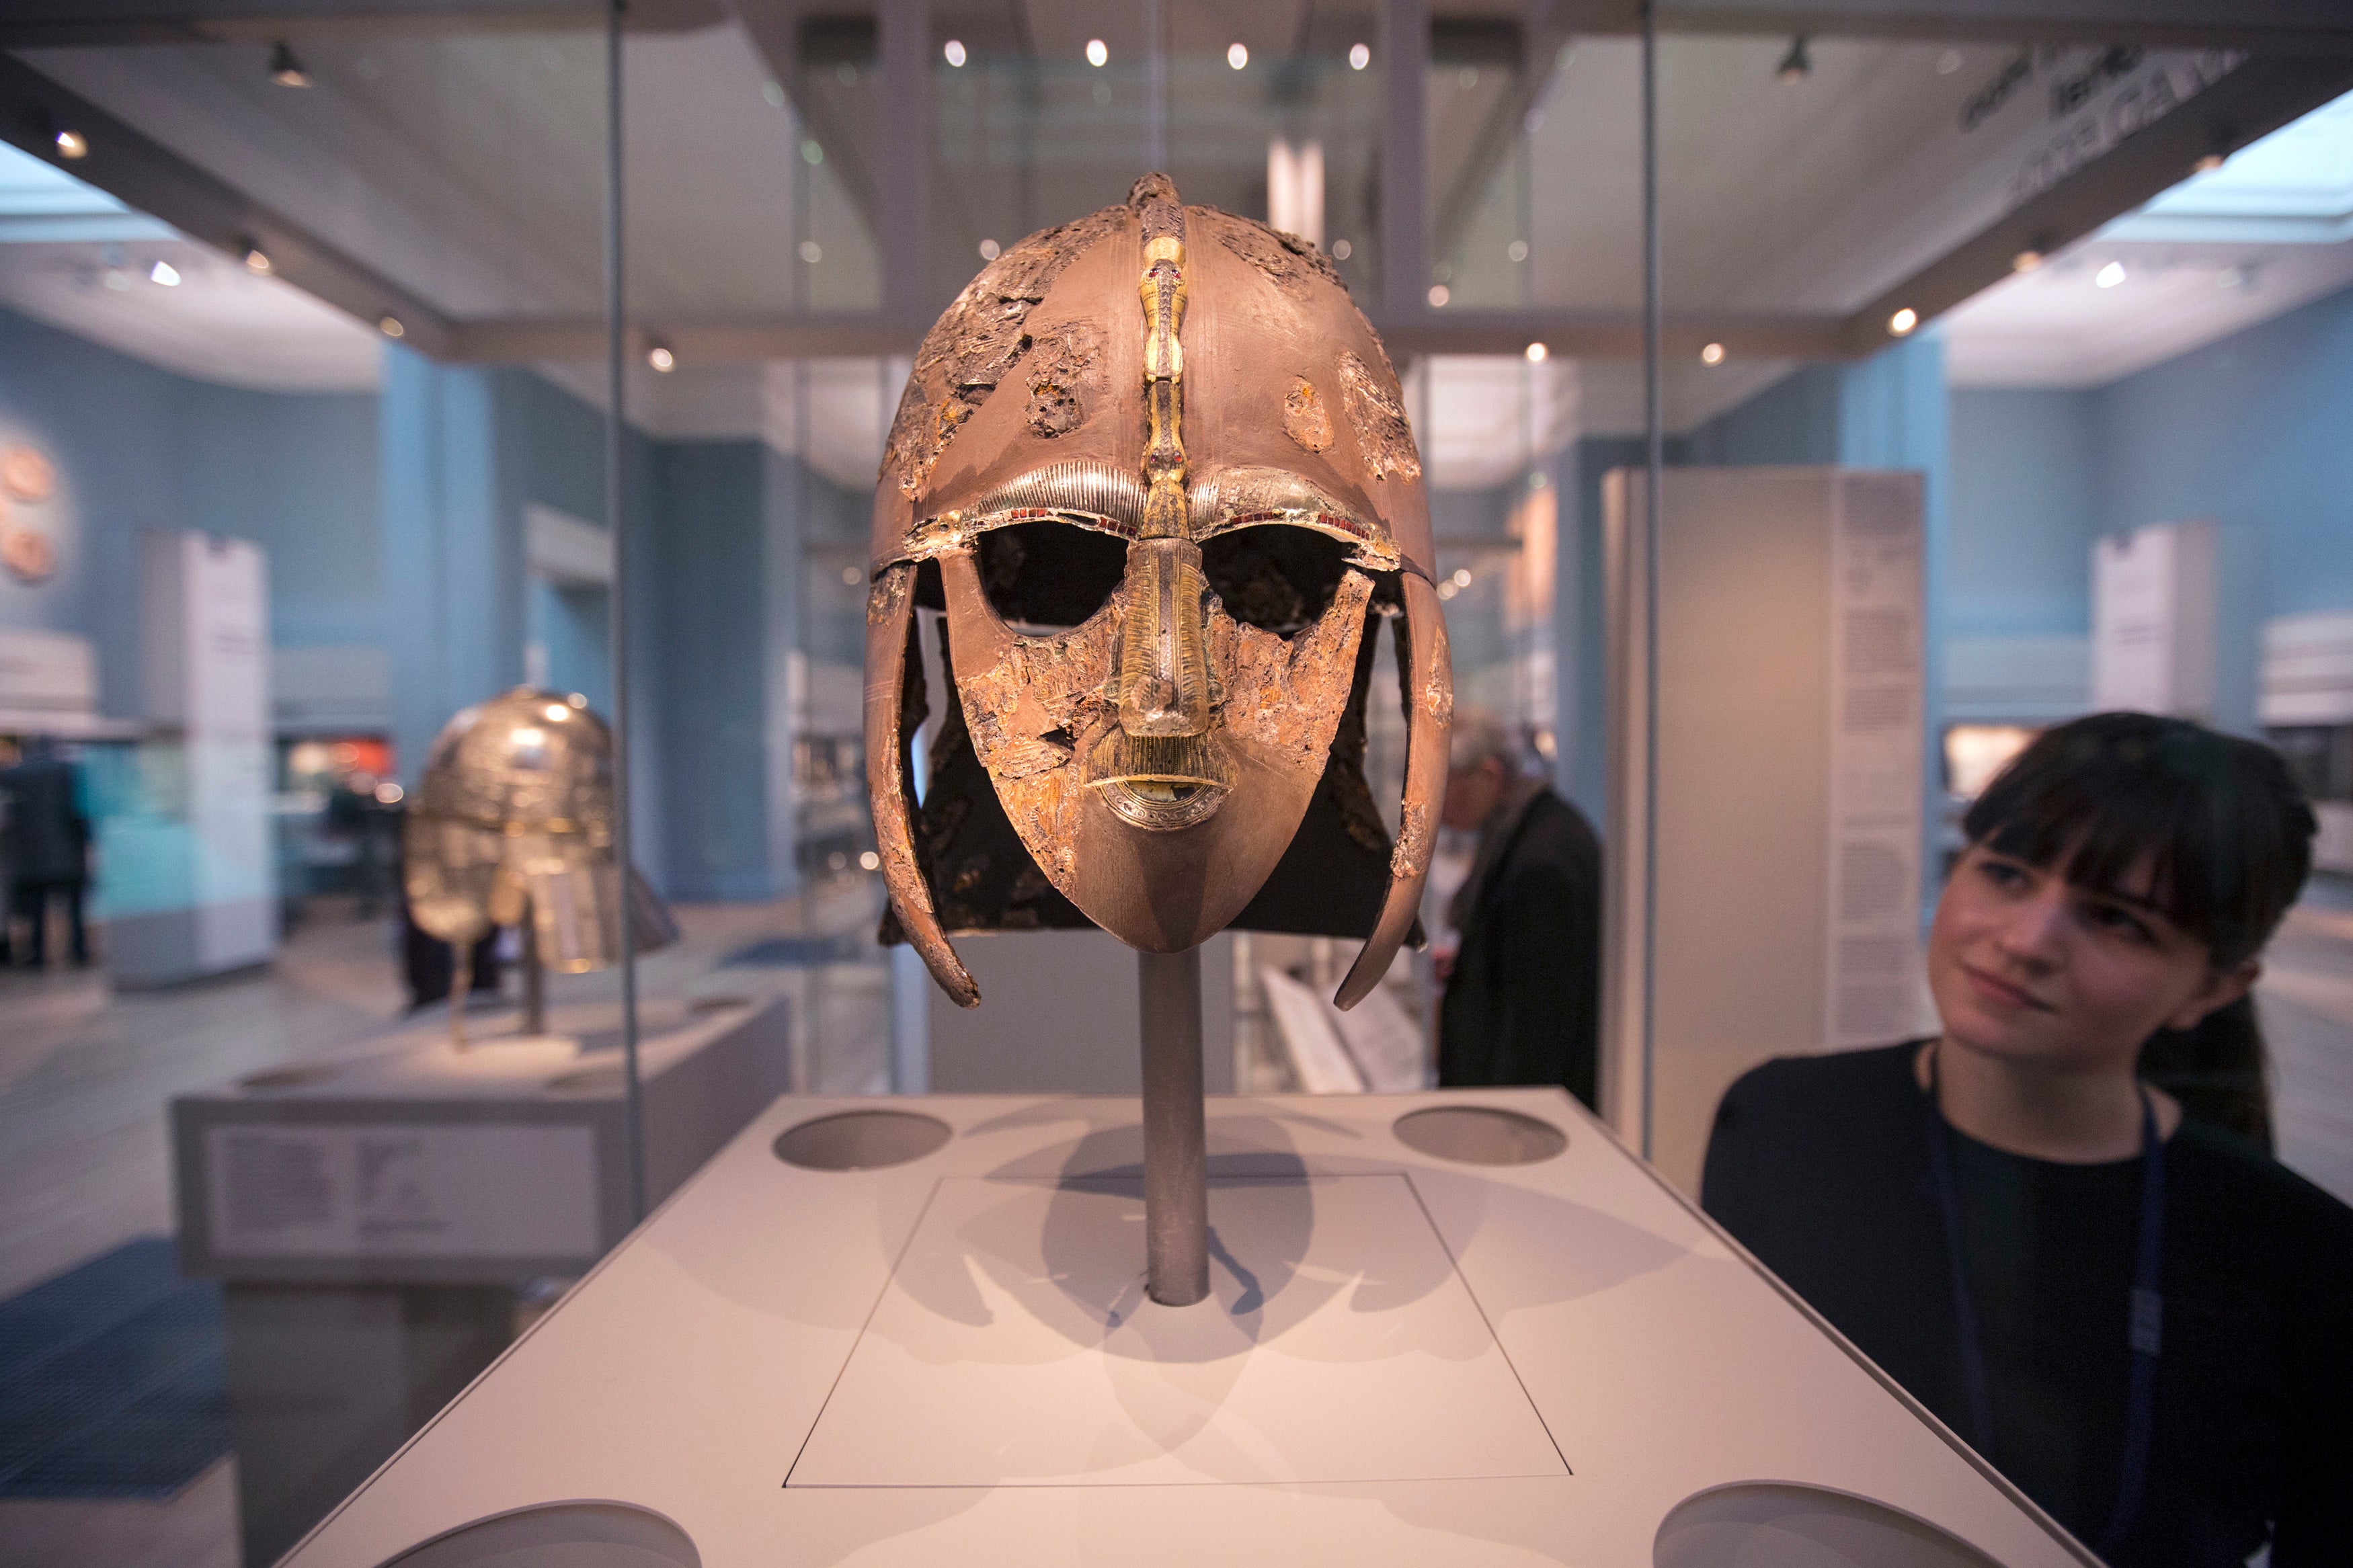 The Sutton Hoo helmet on display in the British Museum